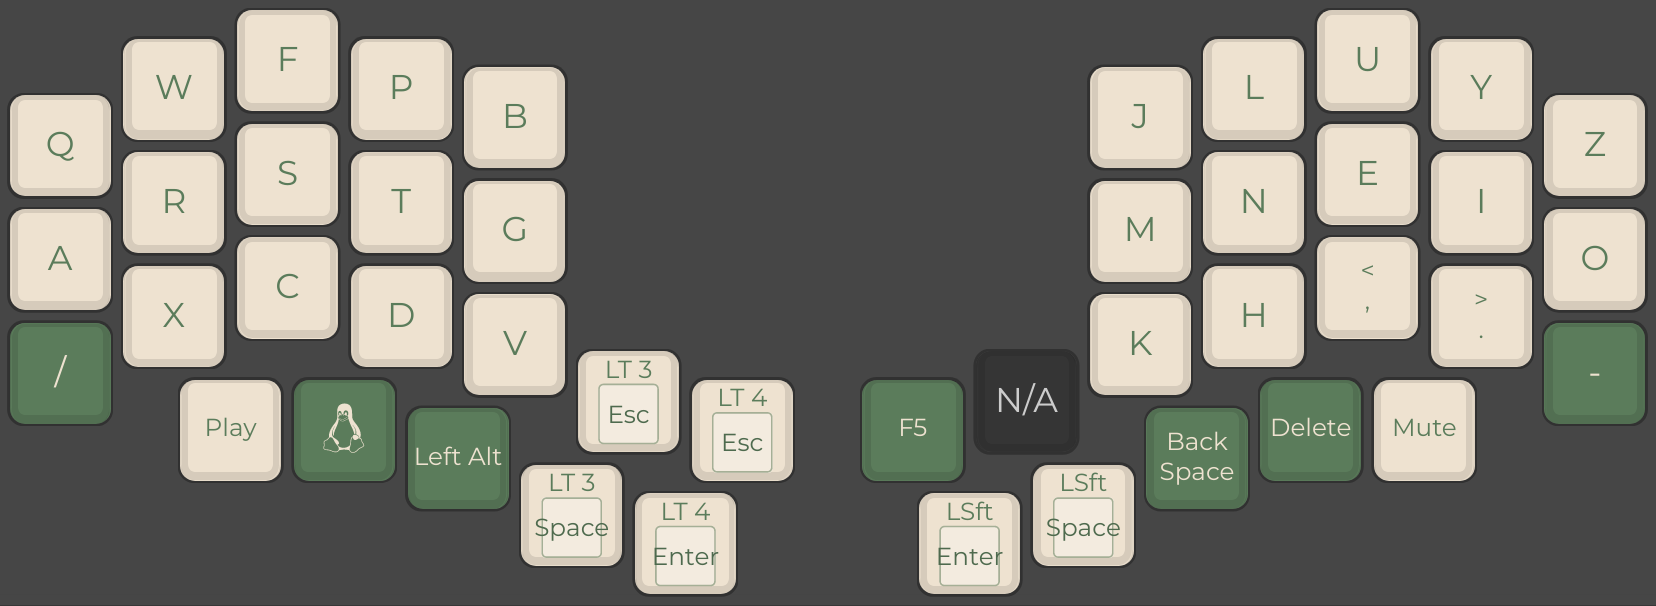 Colemak-DH on a kyria keyboard (Split keyboard with column stagger).